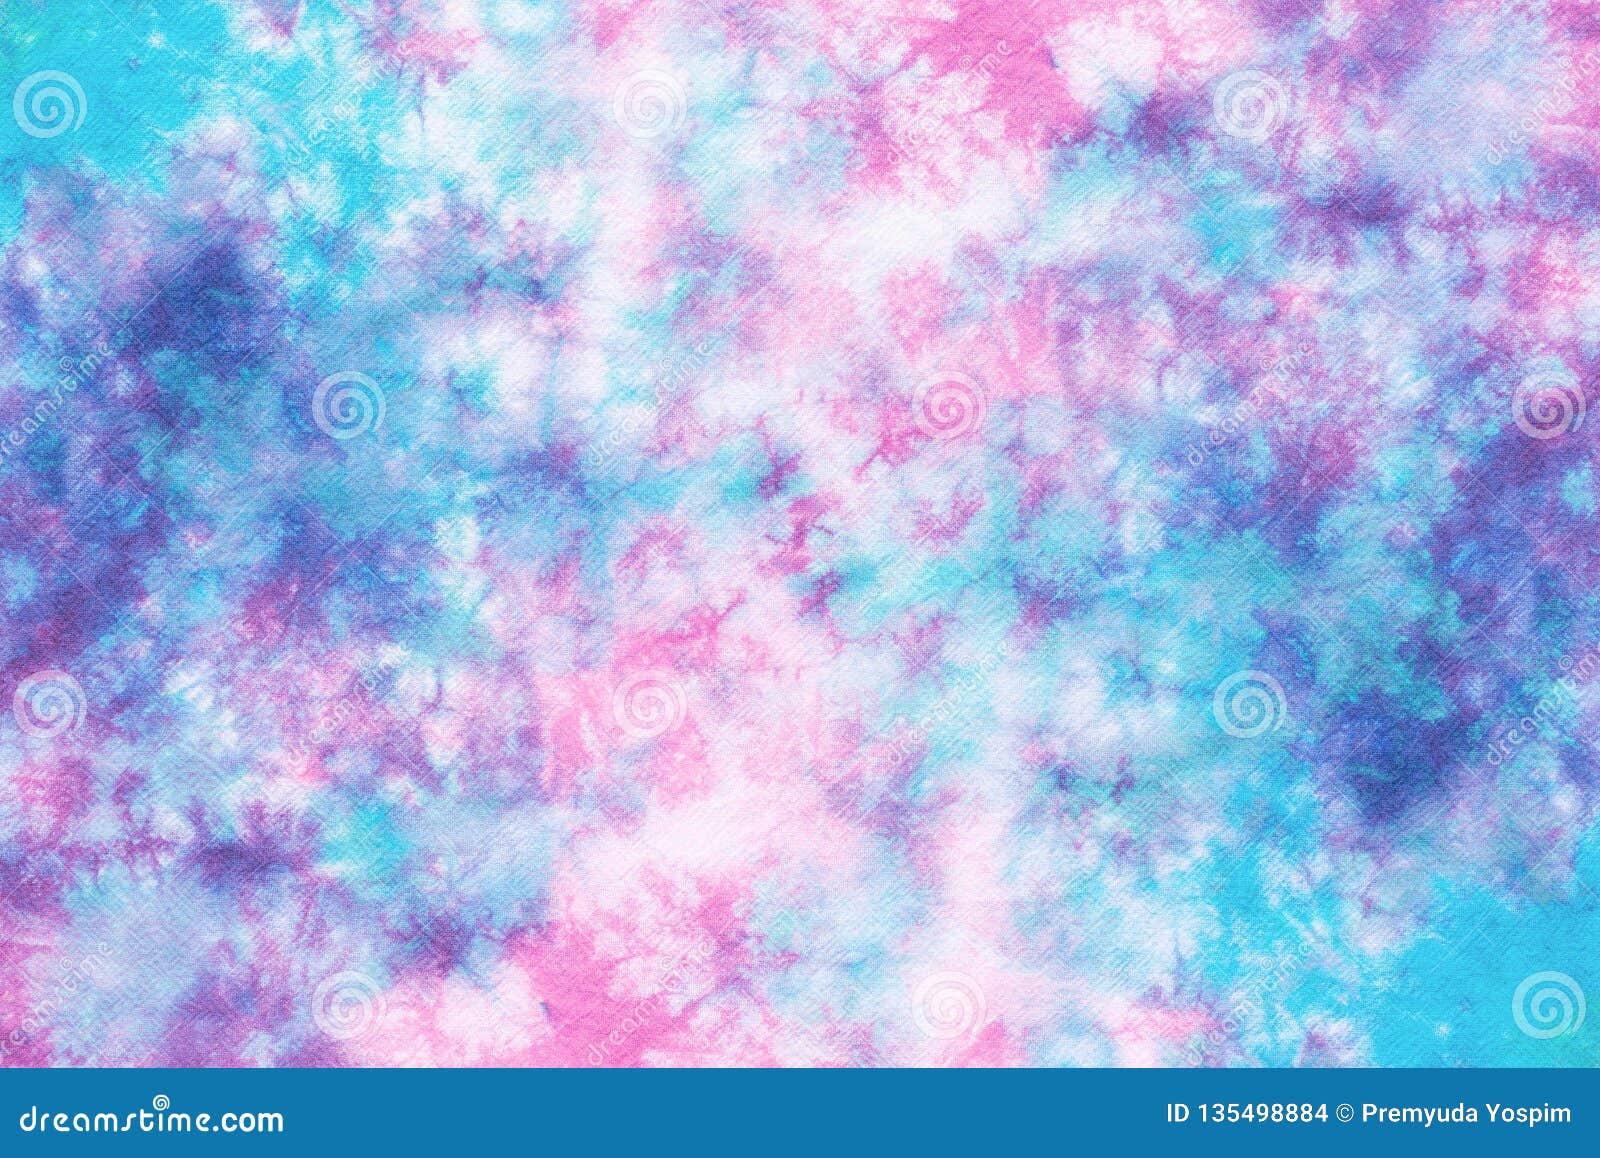 Colorful Tie Dye Pattern Abstract Background Stock Illustration -  Illustration of decorate, culture: 135498884